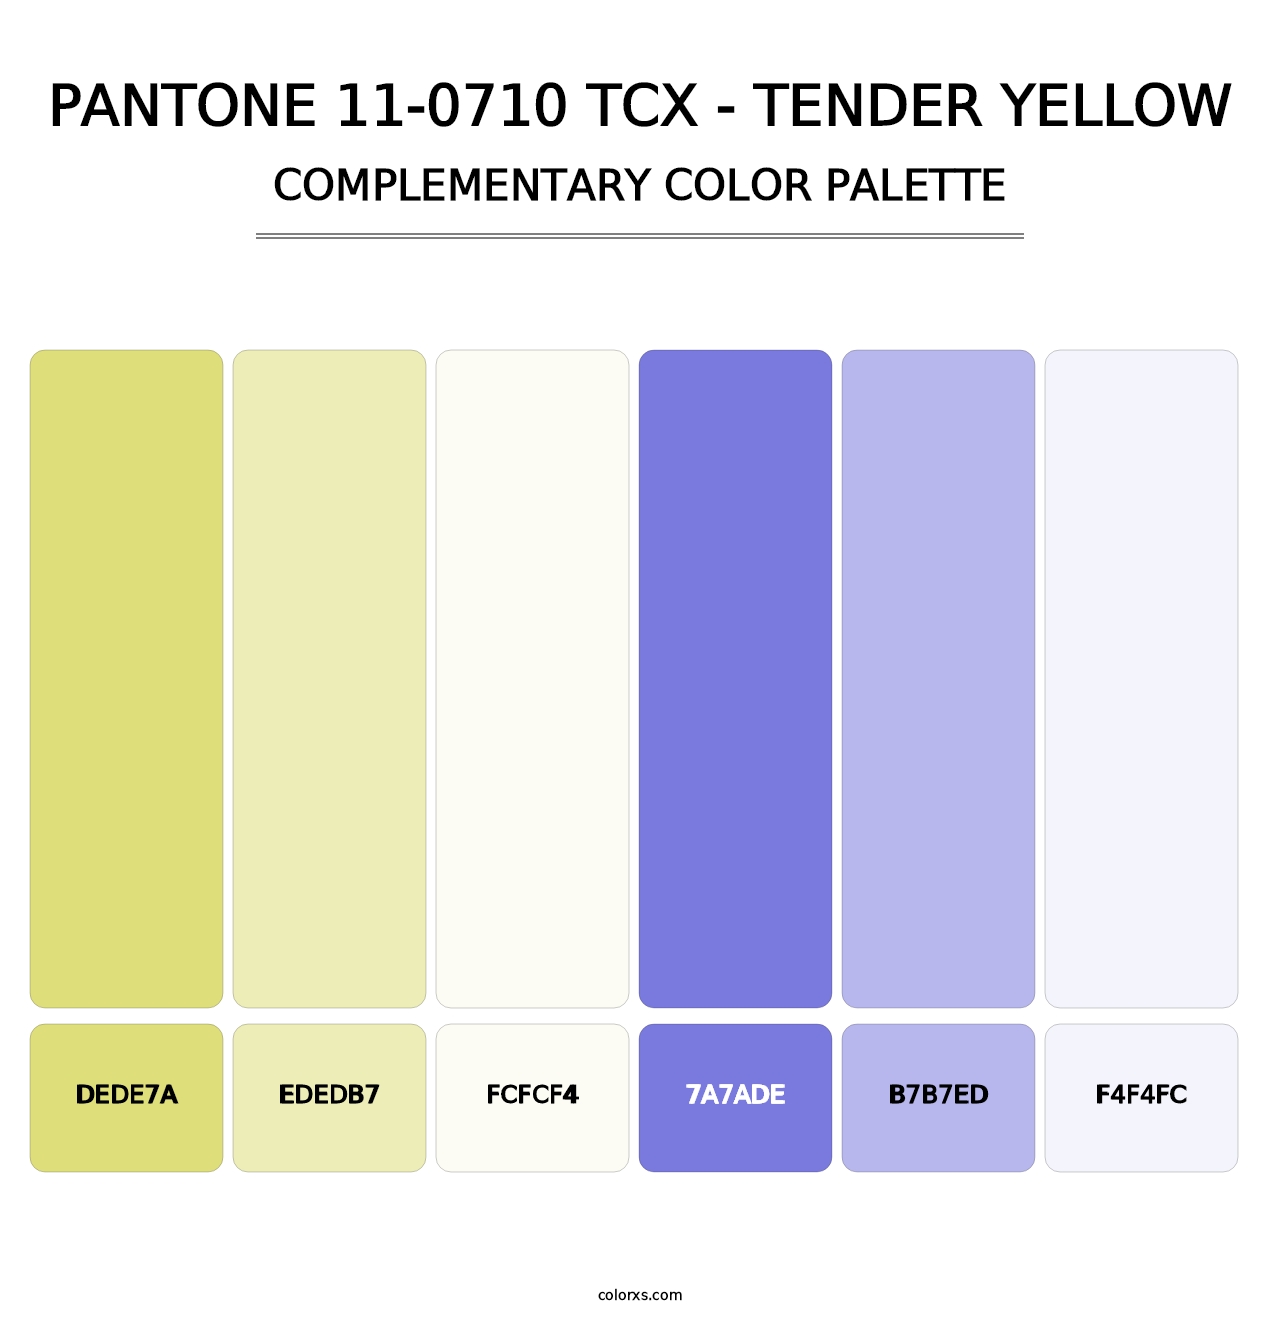 PANTONE 11-0710 TCX - Tender Yellow - Complementary Color Palette